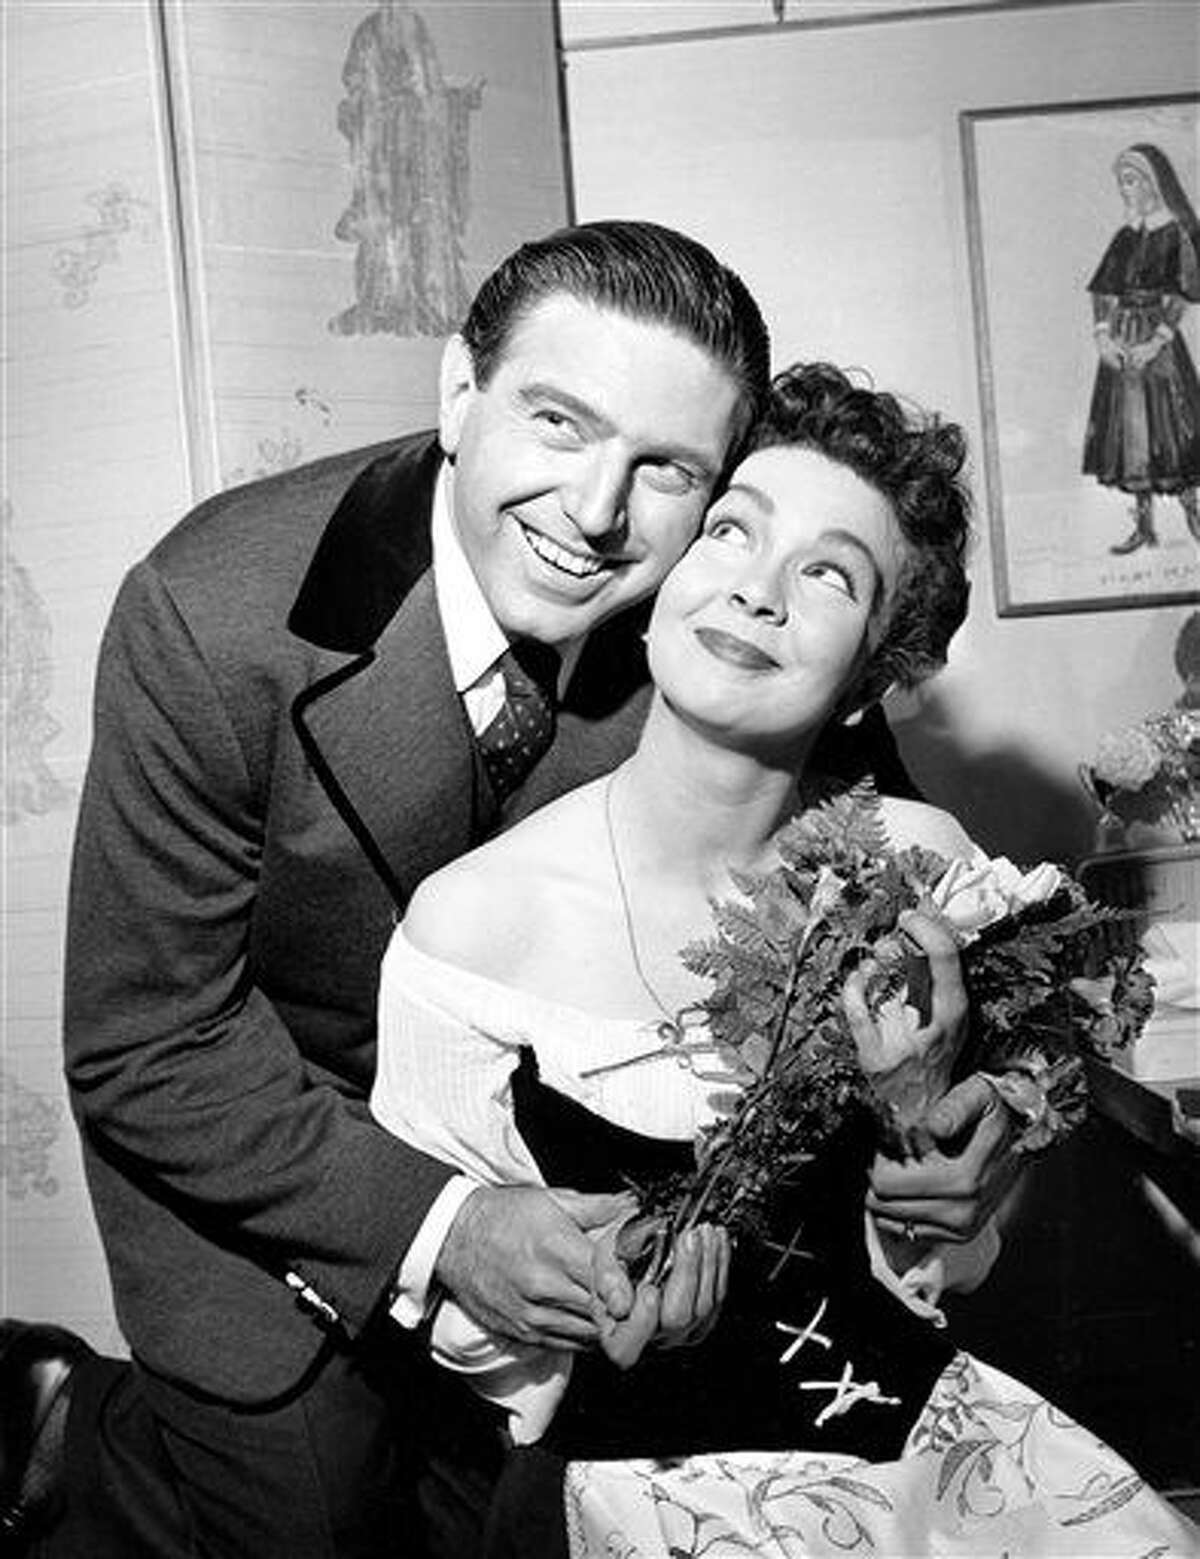 CORRECTS DATE OF DEATH TO TUESDAY, JULY 21 - FILE - In this May 12, 1960 file photo, Renee Guerin, of Juneau, Alaska, poses with her costar Theodore Bikel after their performance of "The Sound of Music" at the Lunt-Fontanne Theatre in New York City. Bikel, the Tony-nominated actor and singer whose passions included folk music and political activism, died Tuesday, July 21, 2015 in a Los Angeles hospital. He was 91. (AP Photo, File)